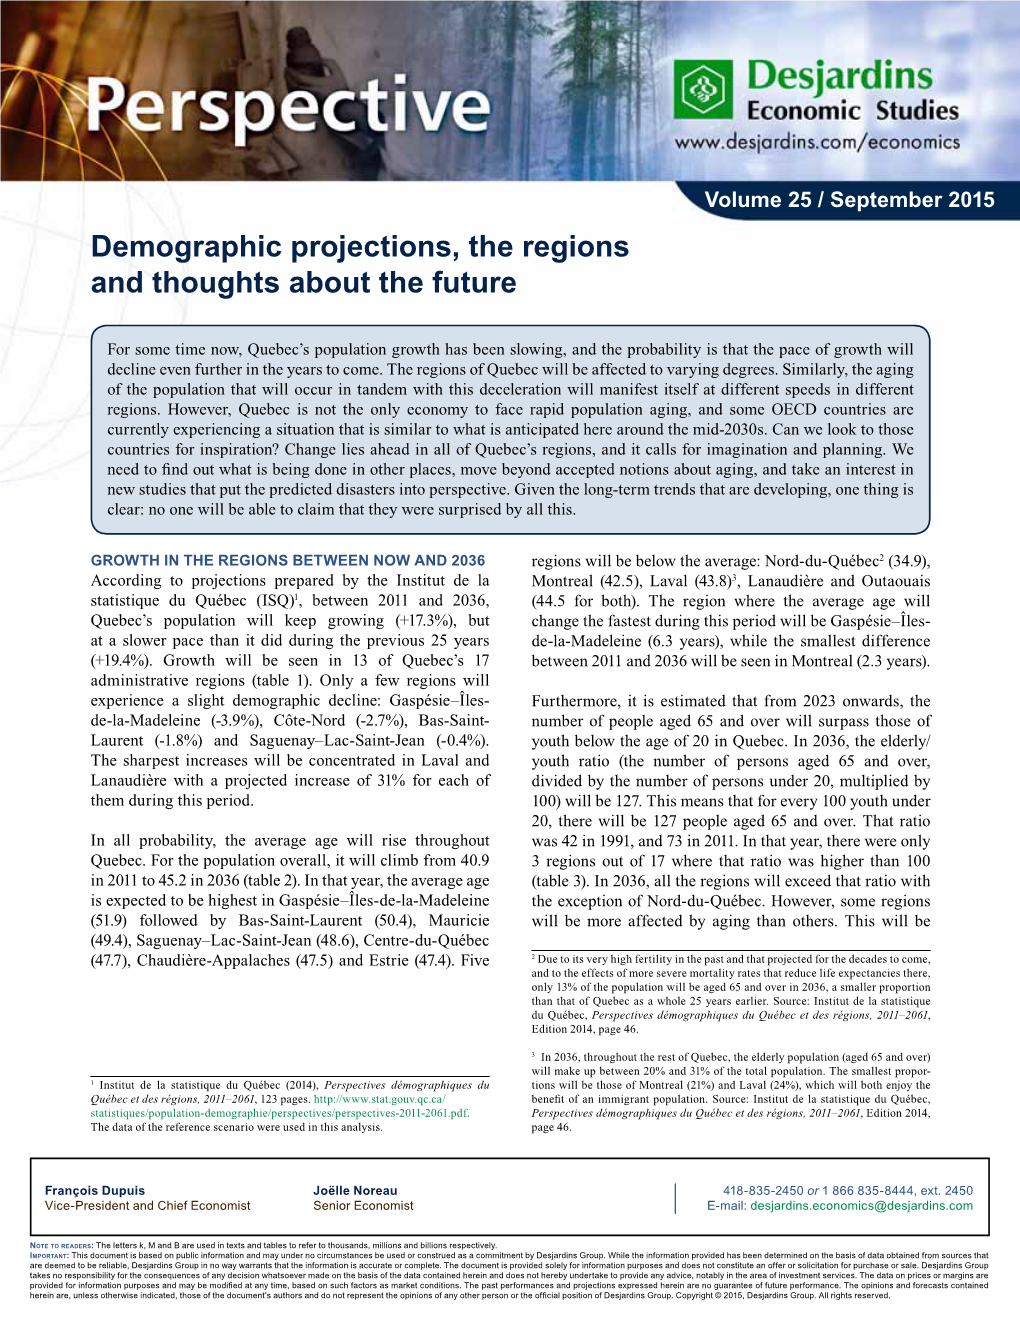 Demographic Projections, the Regions and Thoughts About the Future